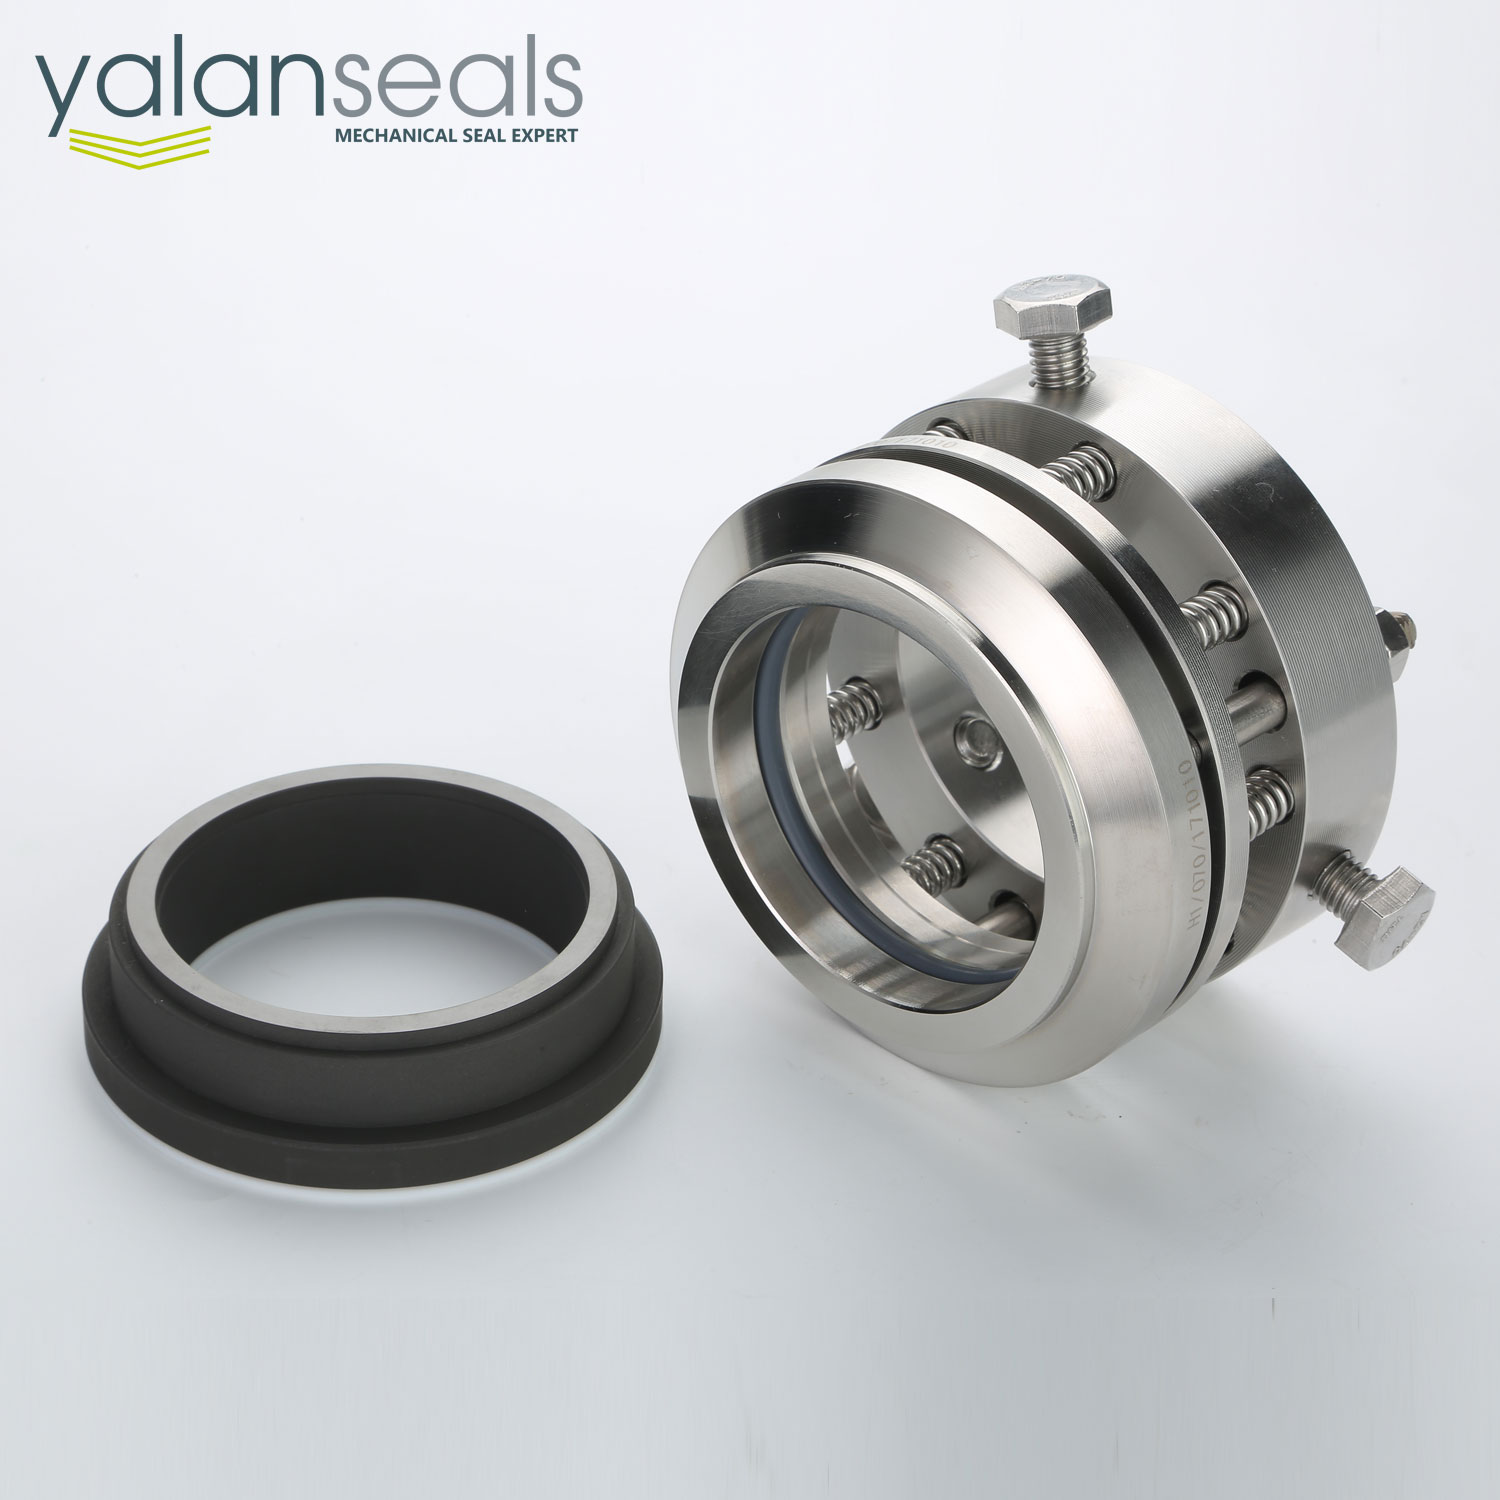 Type 202 Mechanical Seal for Mixers